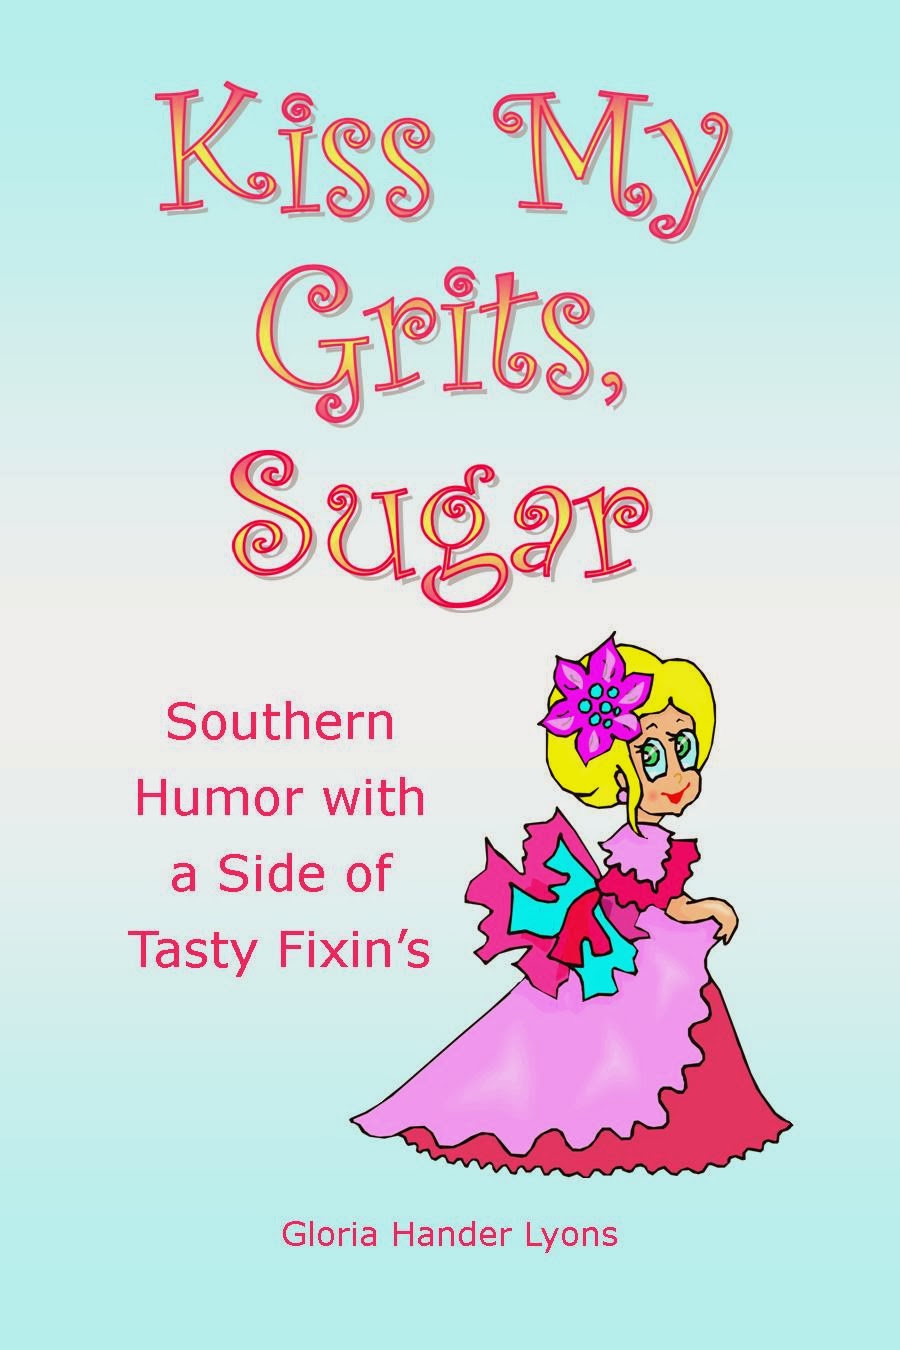 You Might Also enjoy: Kiss My Grits, Sugar: Southern Humor With a Side of tasty fixin's